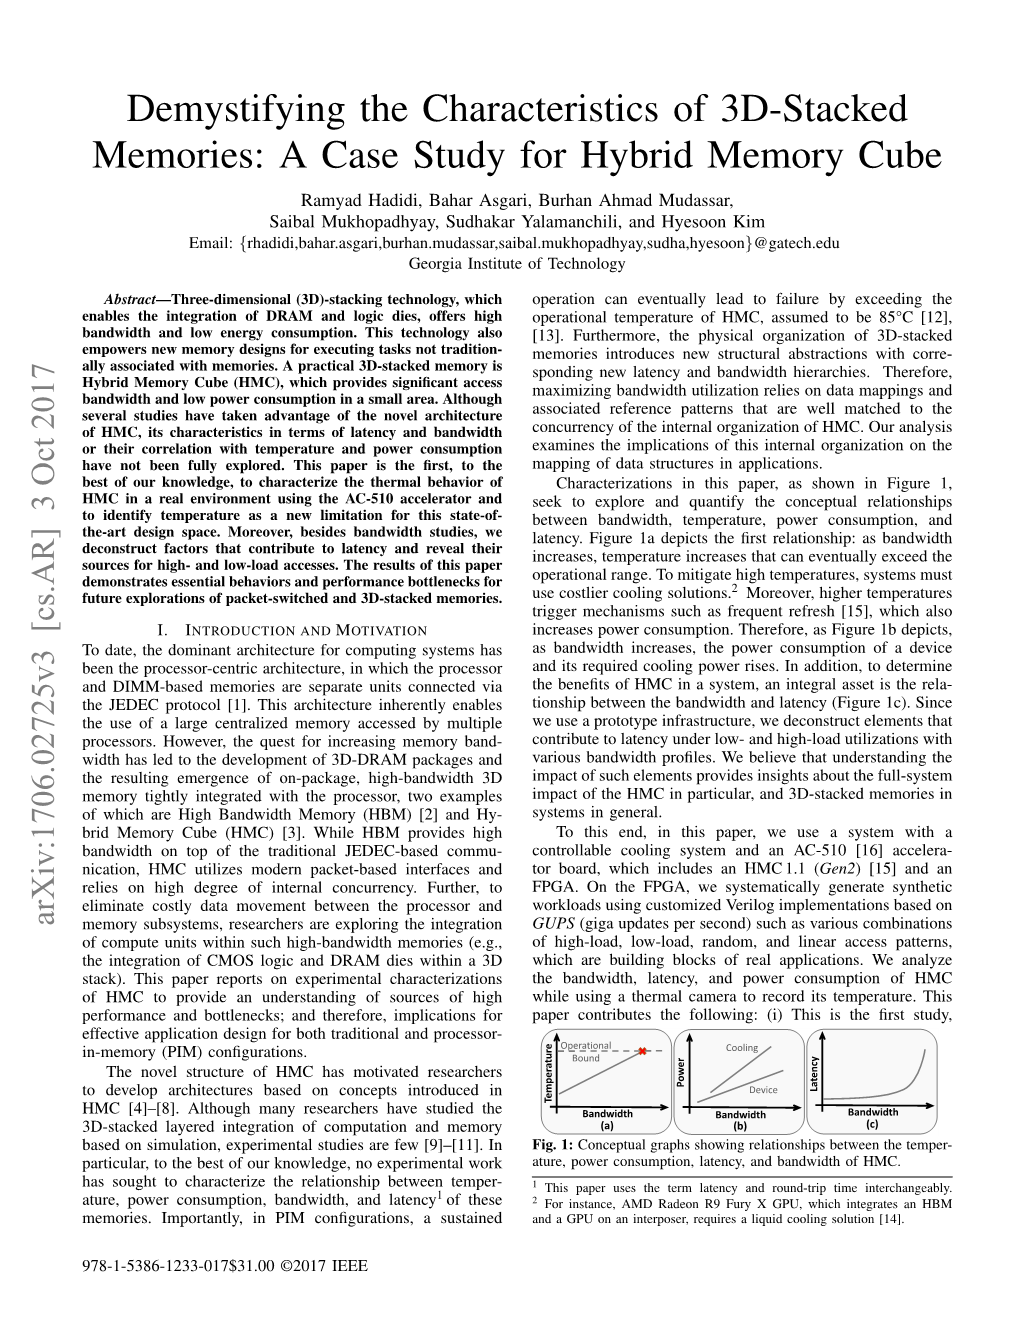 A Case Study for Hybrid Memory Cube